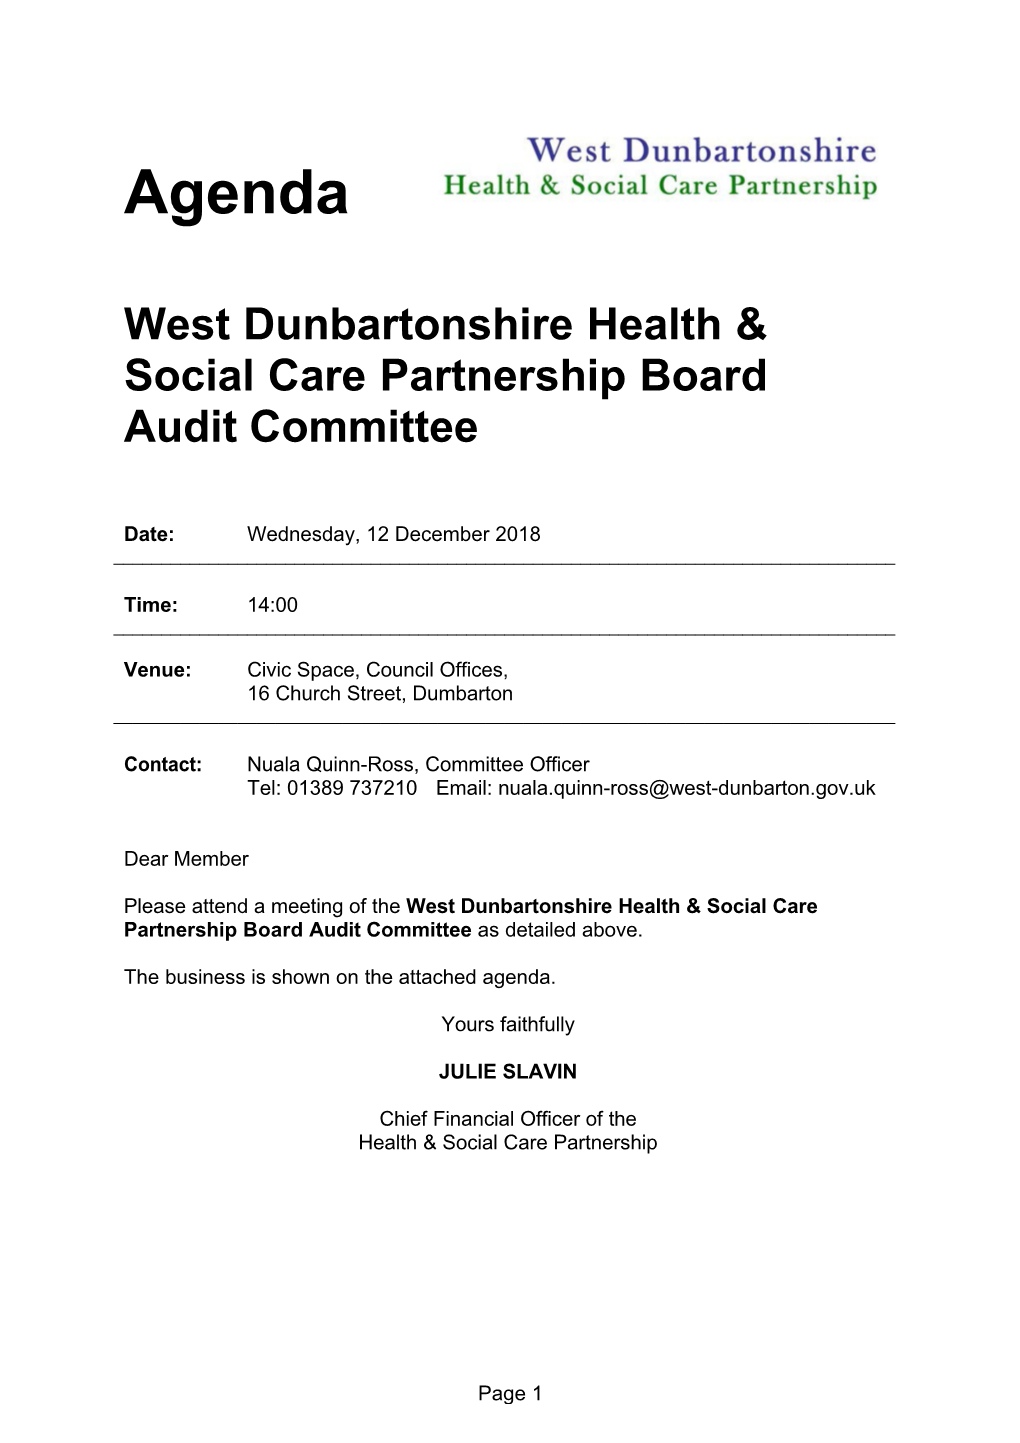 West Dunbartonshire Council and NHS Greater Glasgow and Clyde That May Have an Impact Upon the West Dunbartonshire Health & Social Care Partnership Board;